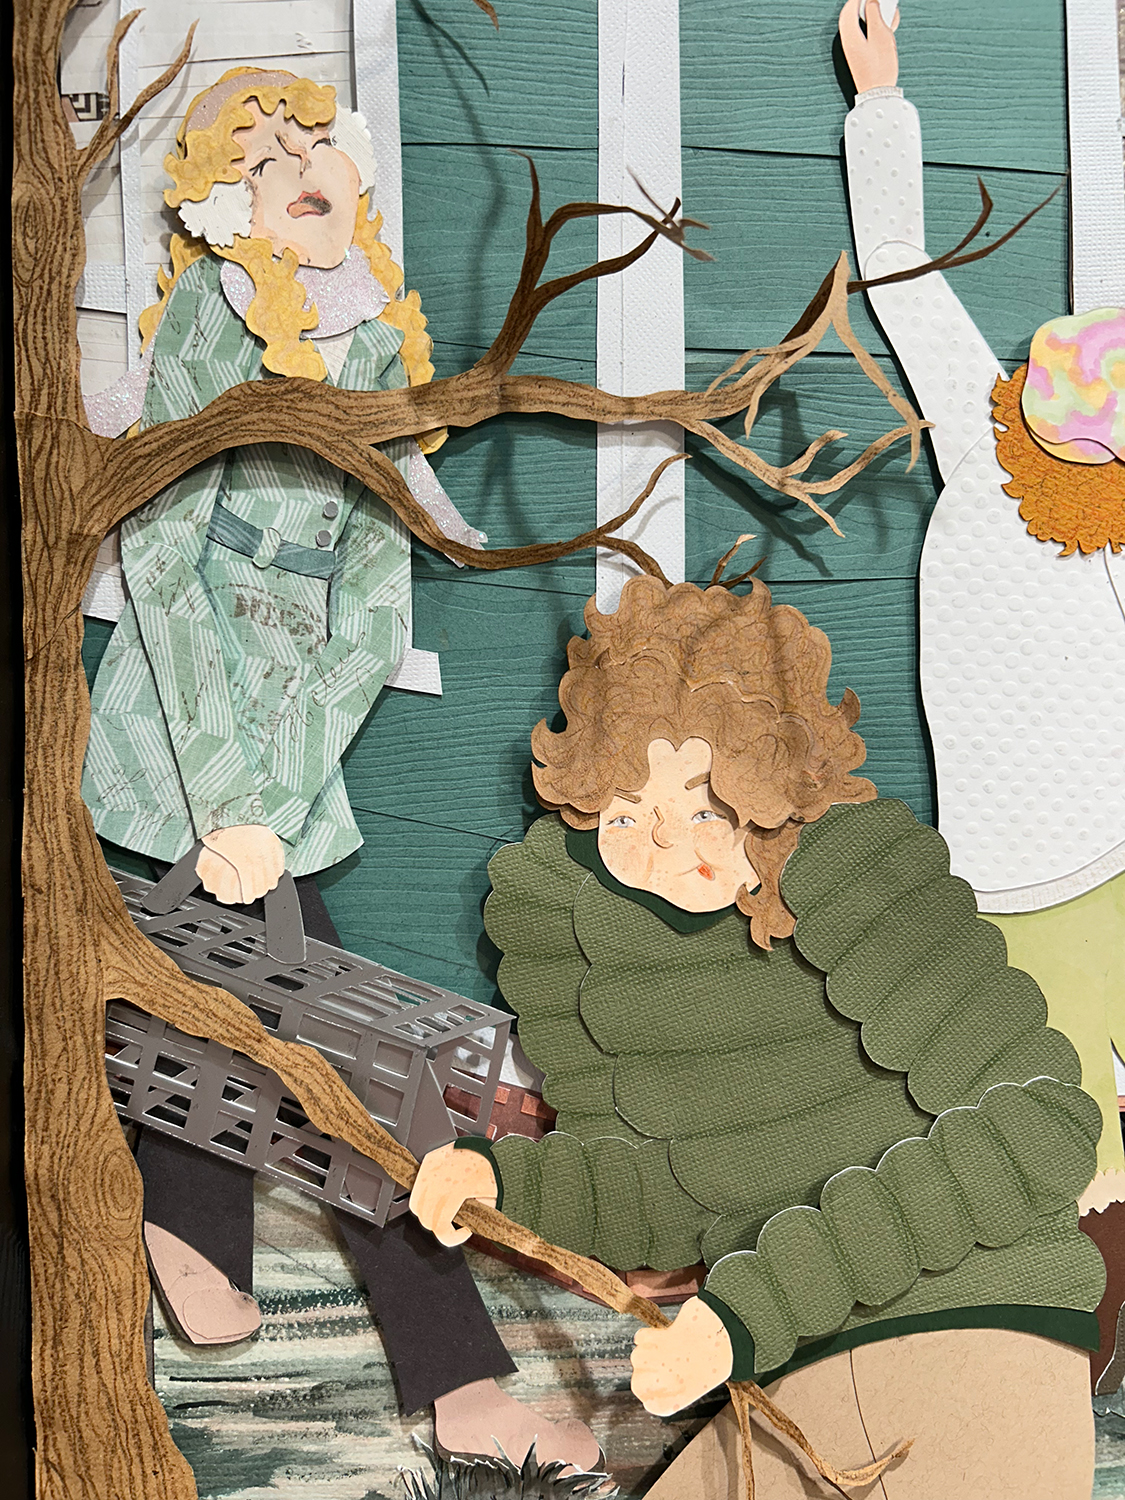 An image of a cut-paper scene. Three female figures are shown in front of the corner of a house. The figure on the left carries a silver animal cage. The figure in the middle foreground attempts to break off twig from a tree. The figure on the right reaches upward offering a marshmallow to a raccoon out of frame.